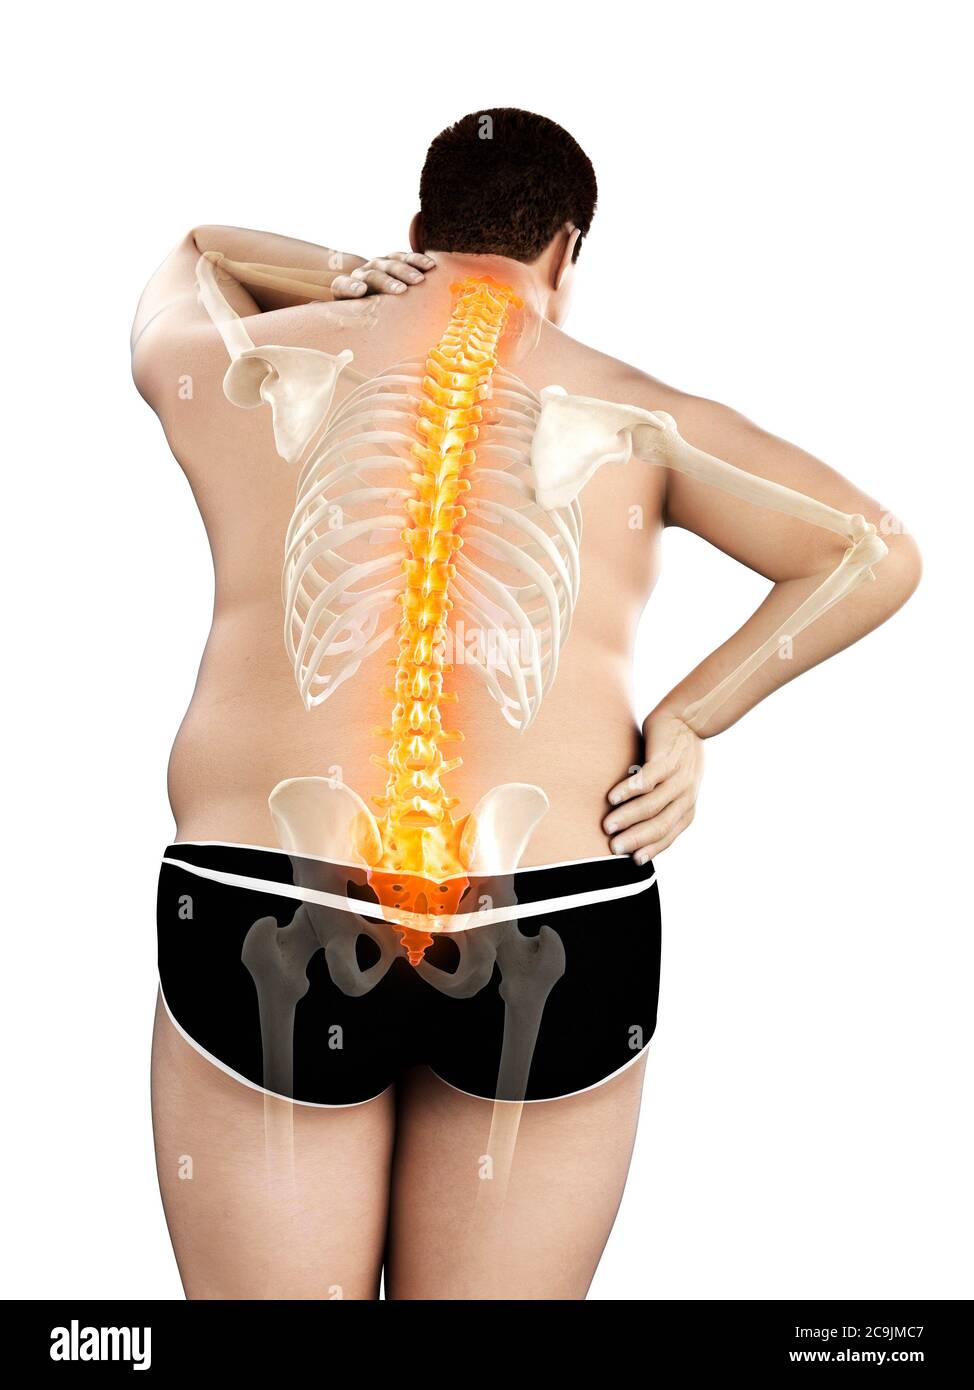 Obese man with back pain, computer illustration Stock Photo - Alamy